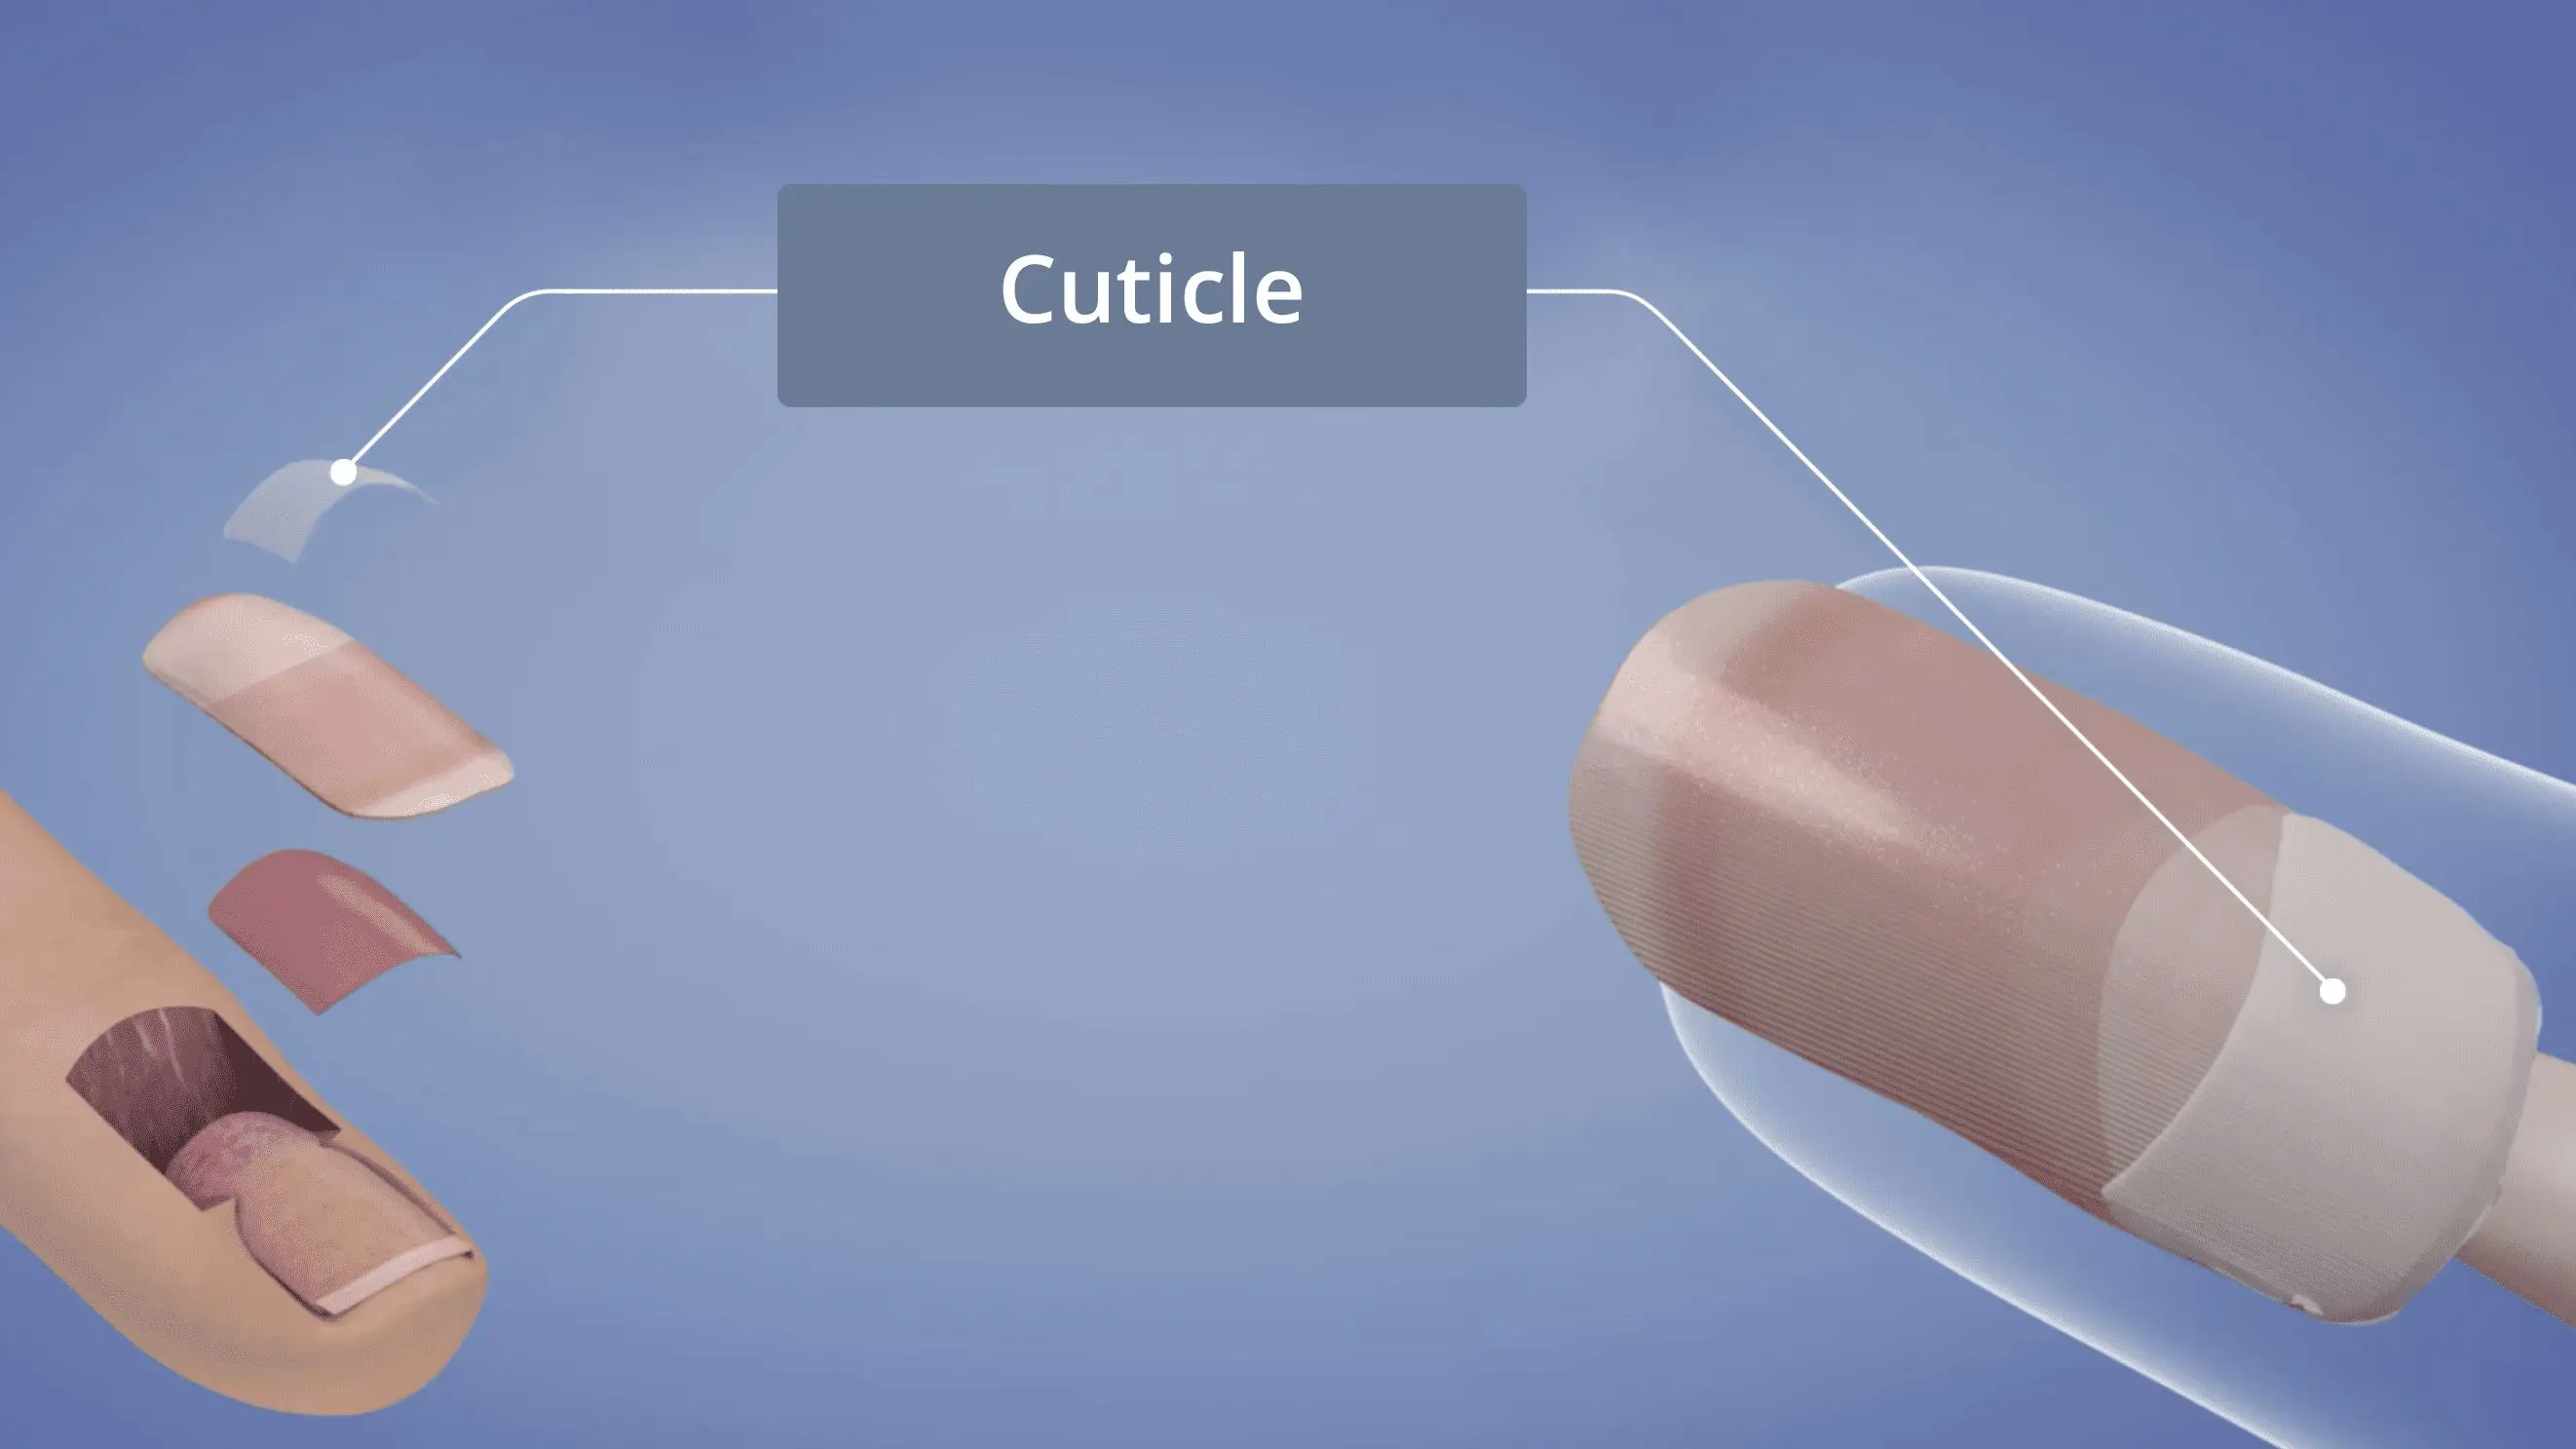 3 Ways to Soften Cuticles - wikiHow